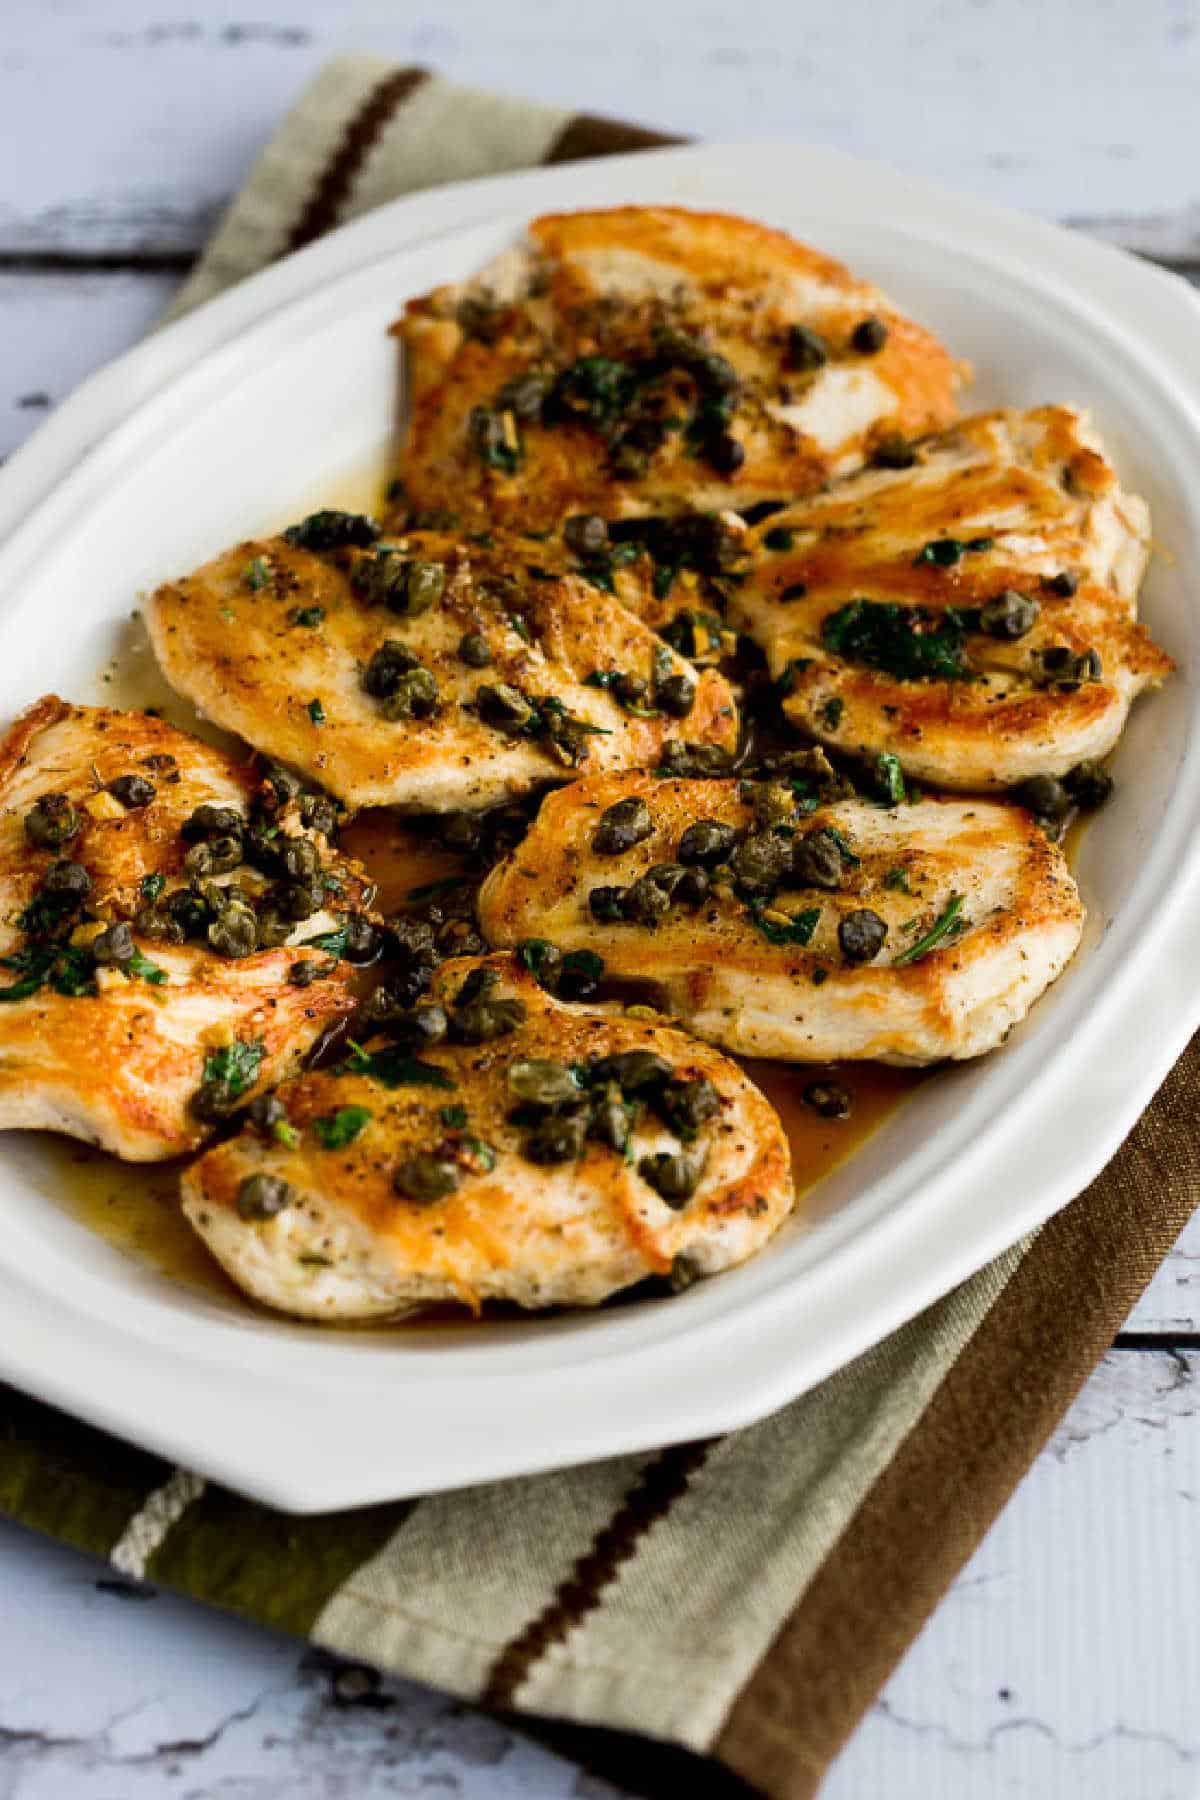 Chicken Piccata with Fried Capers shown on serving plate